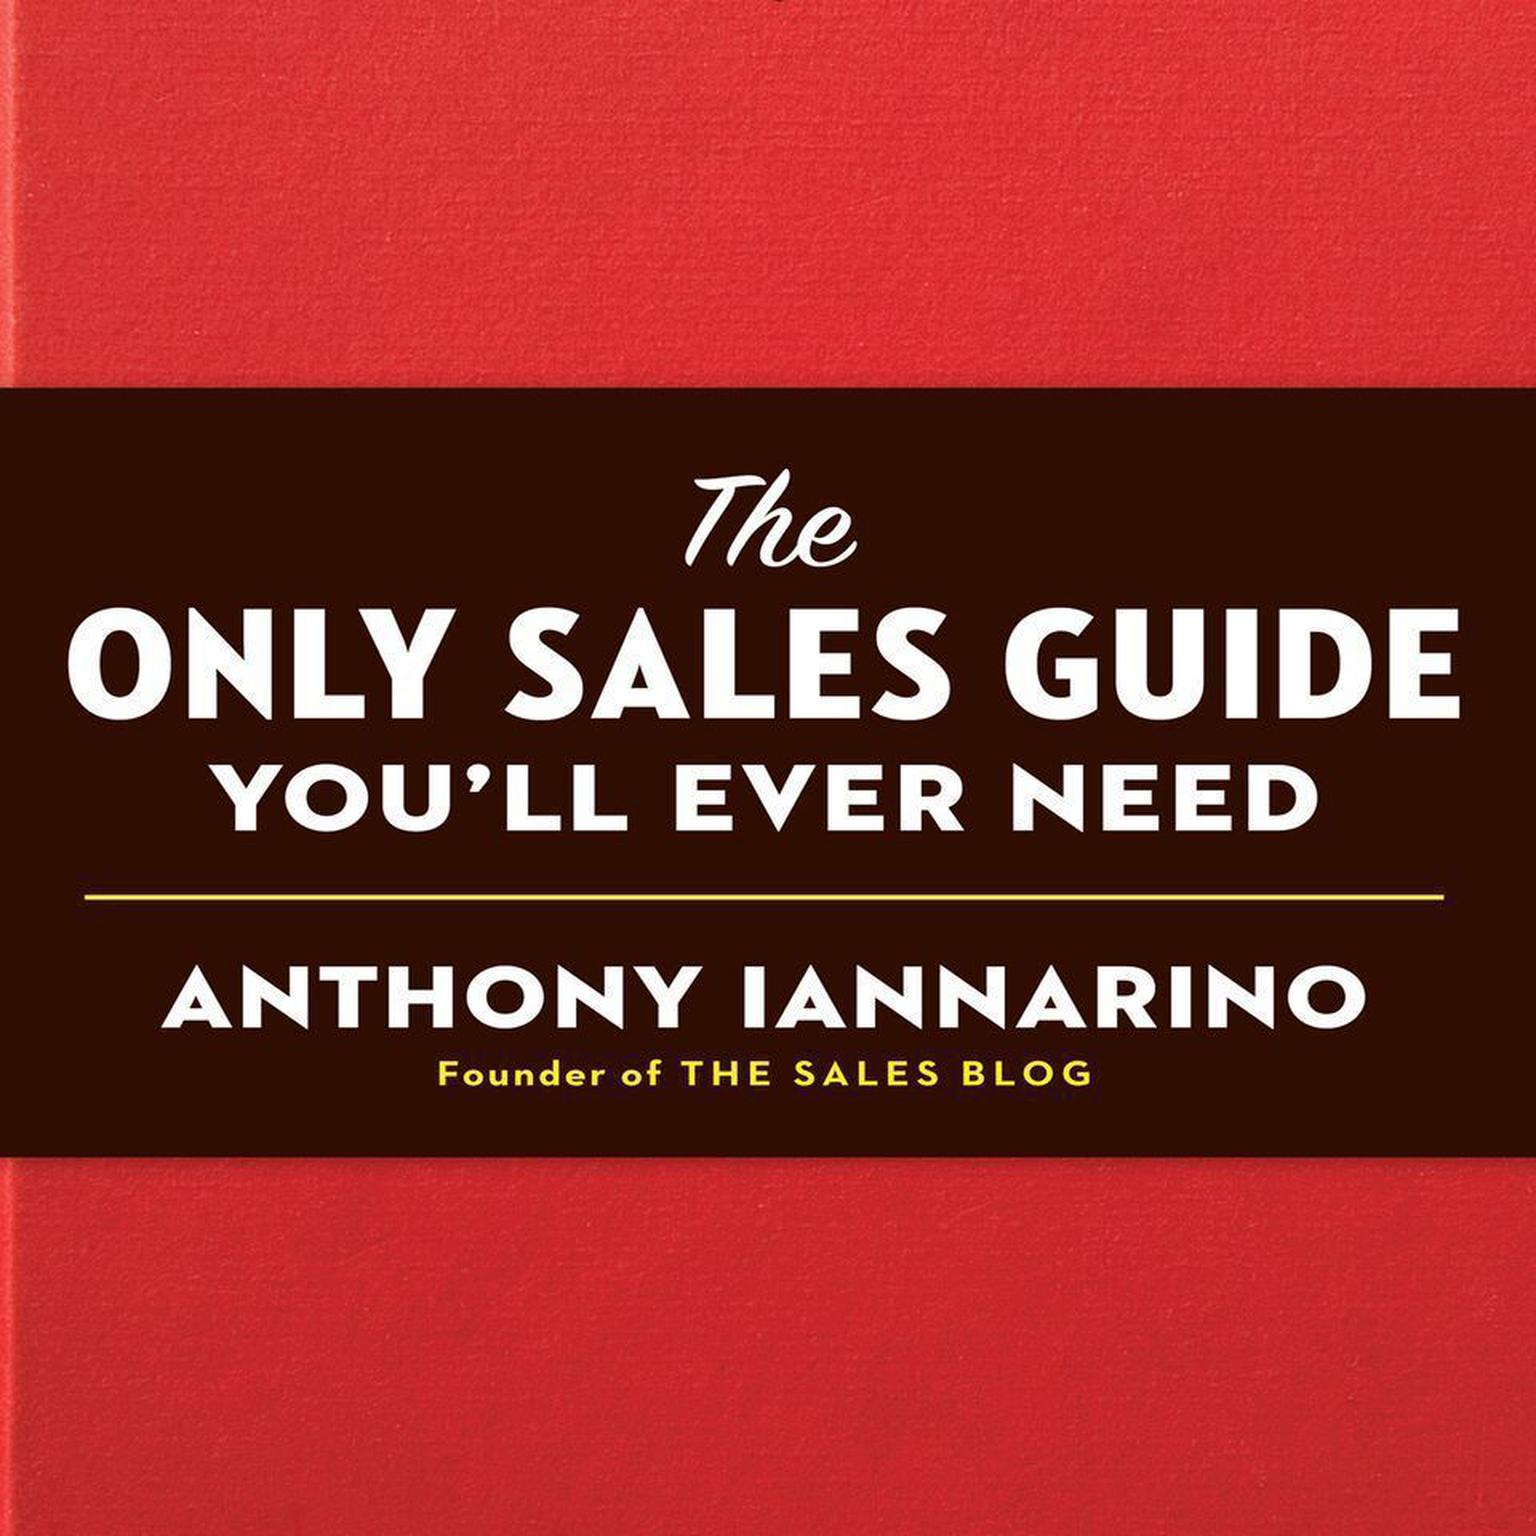 The Only Sales Guide Youll Ever Need Audiobook, by Anthony Iannarino